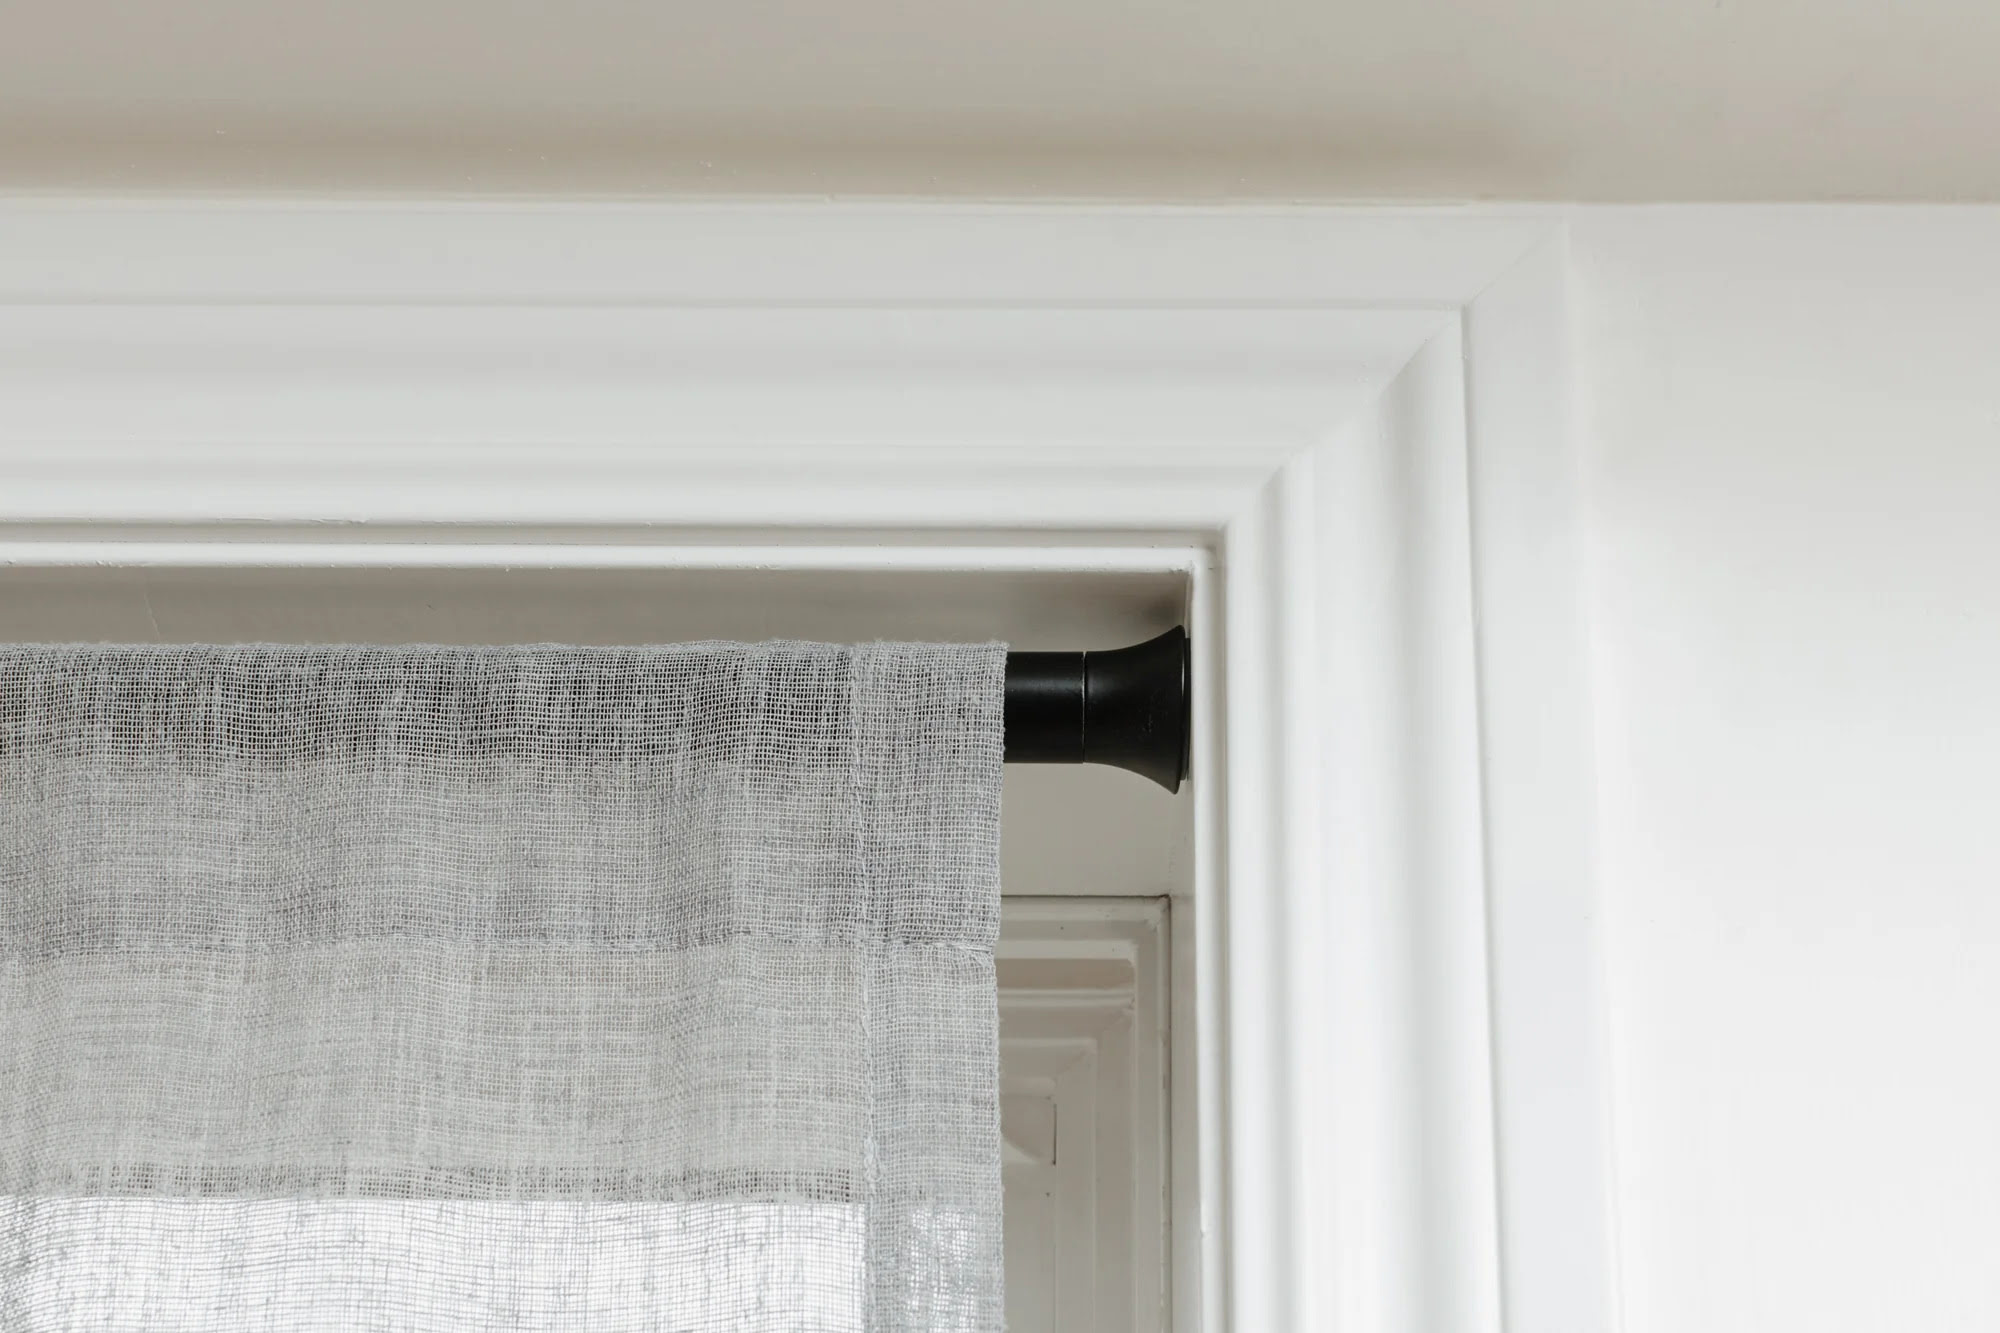 How To Use Tension Rod For Curtains